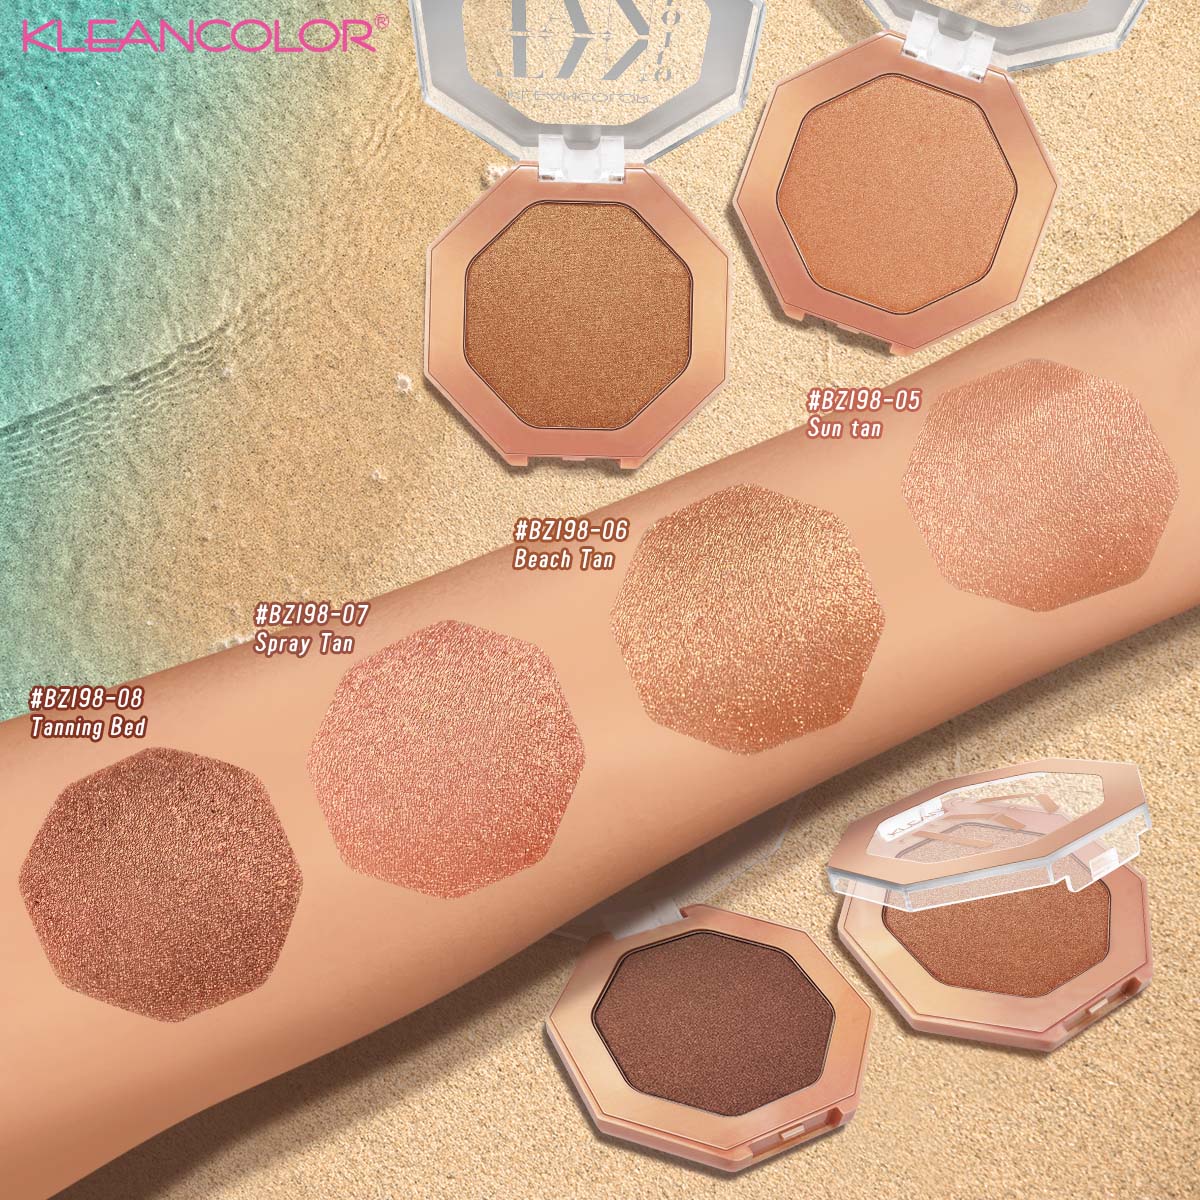 Kleancolor - Tan Out Of Tan Shimmer Bronzer